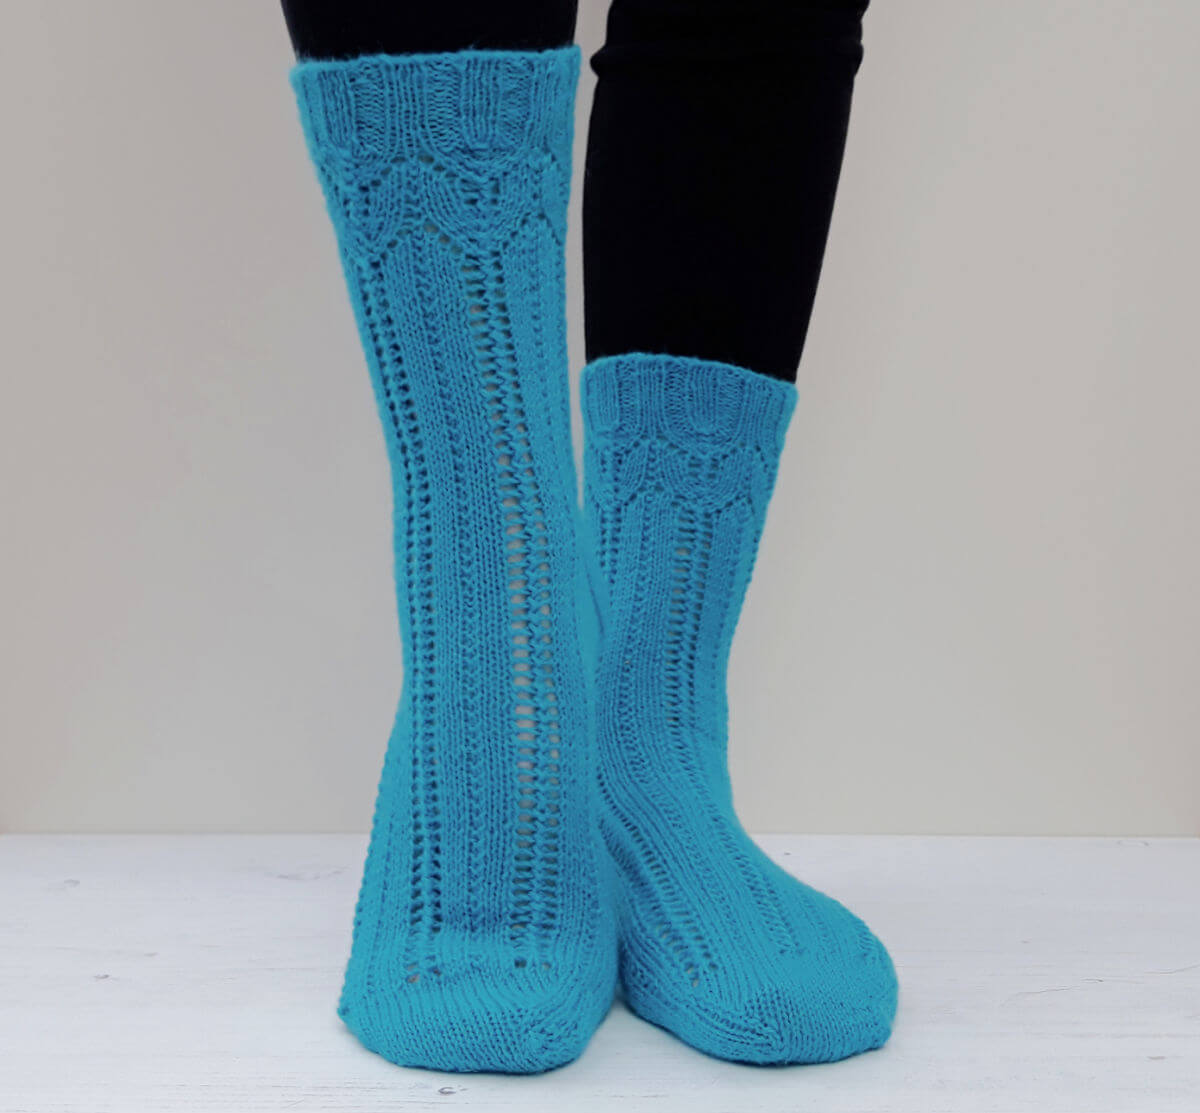 A pair of blue lace patterned socks modelled against a cream background. One heel is slightly raised.